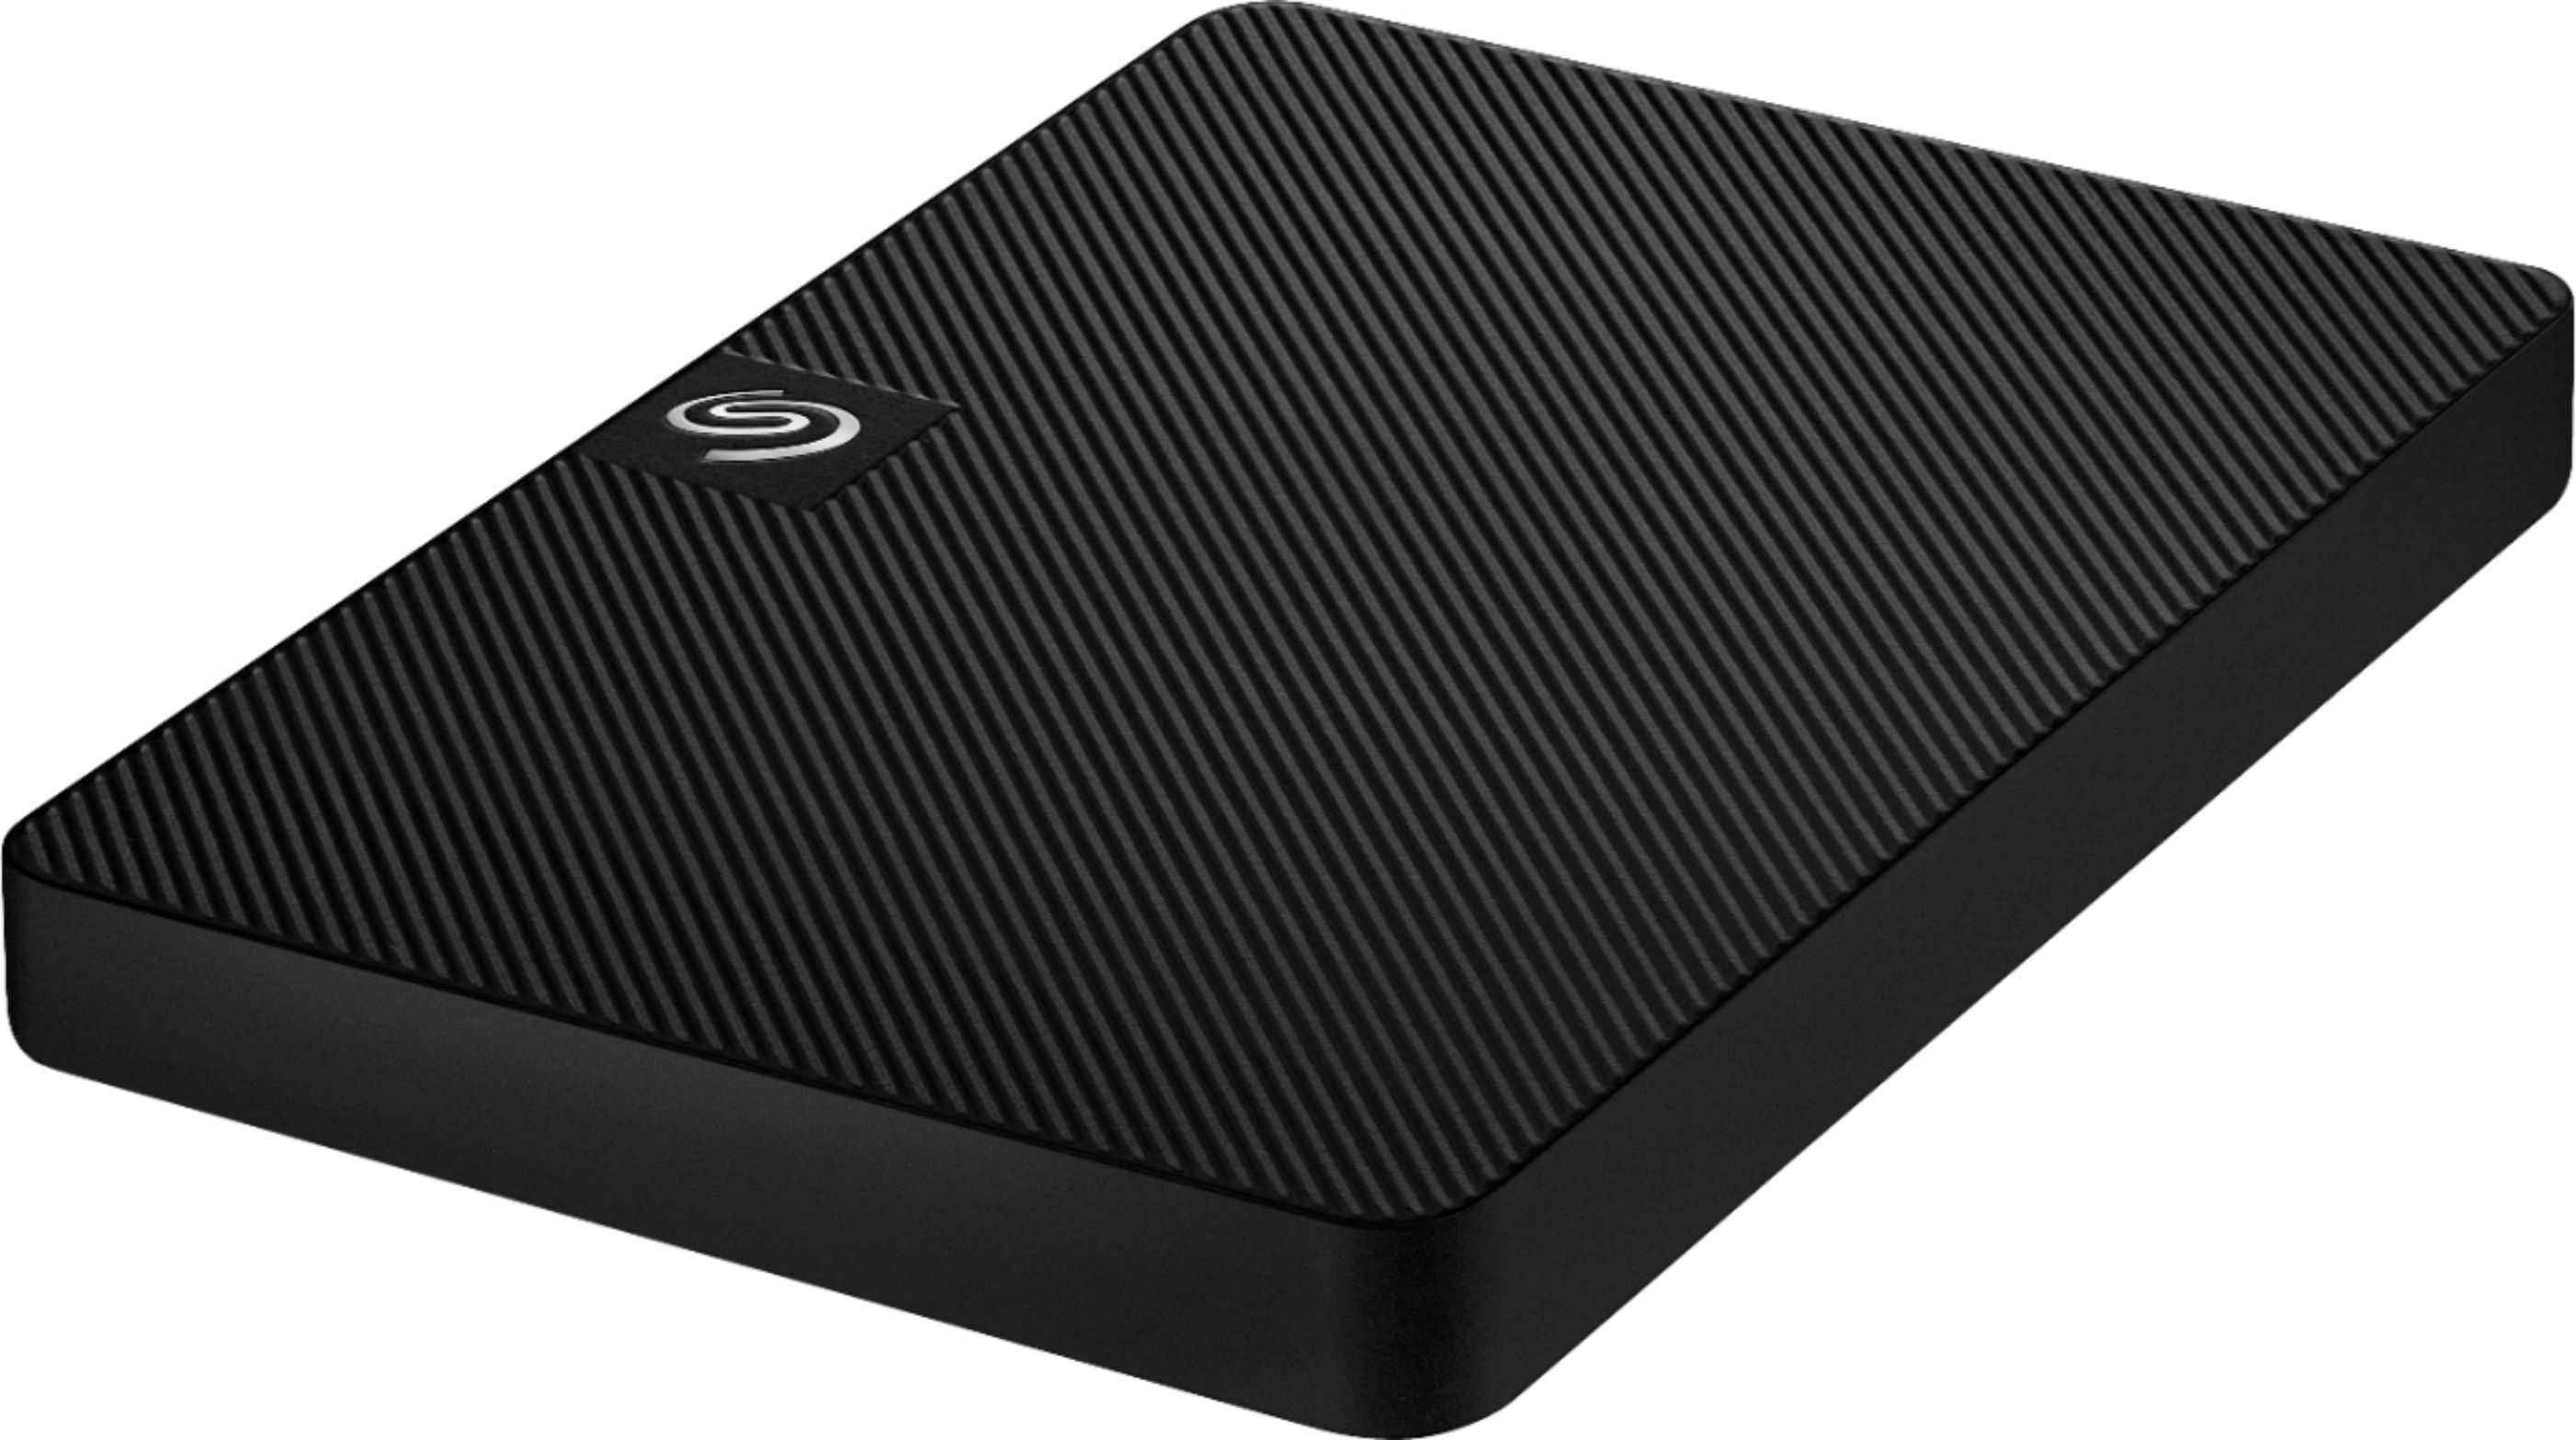 Left View: Seagate - Expansion 2TB External USB 3.0 Portable Hard Drive with Rescue Data Recovery Services - Black